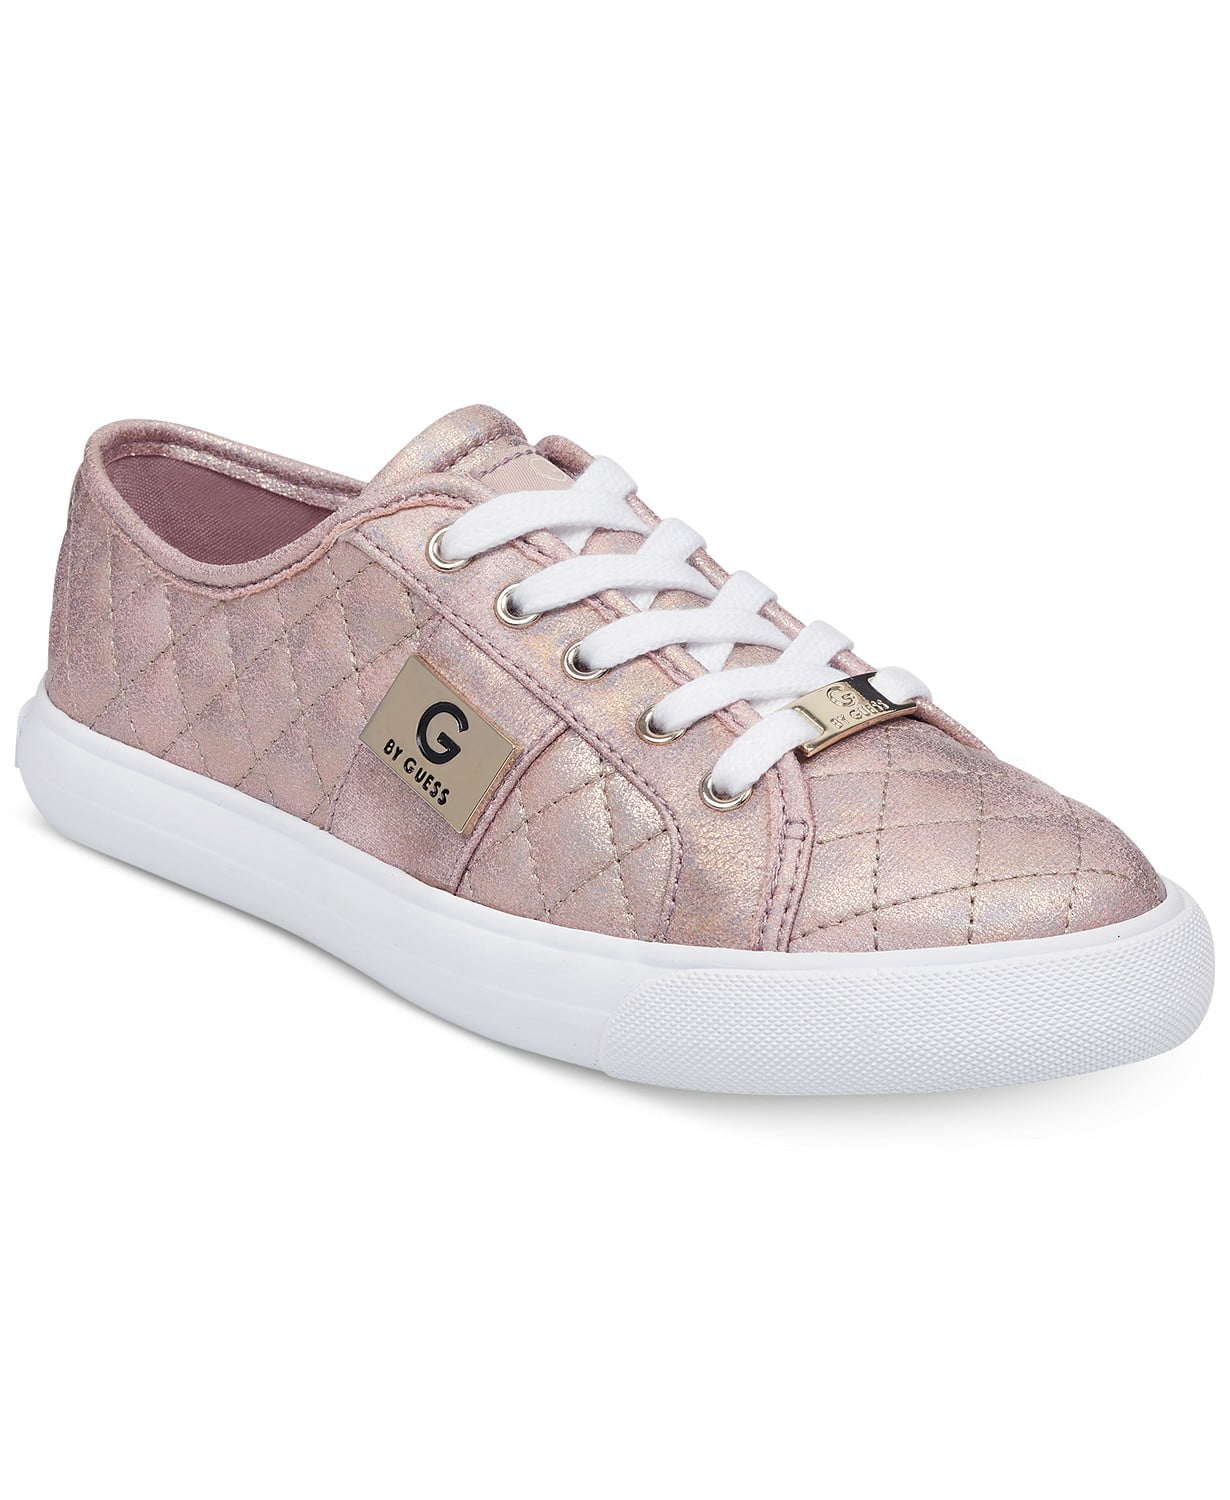 Guess Women's Loven Casual Lace-up Sneakers - White - Walmart.com